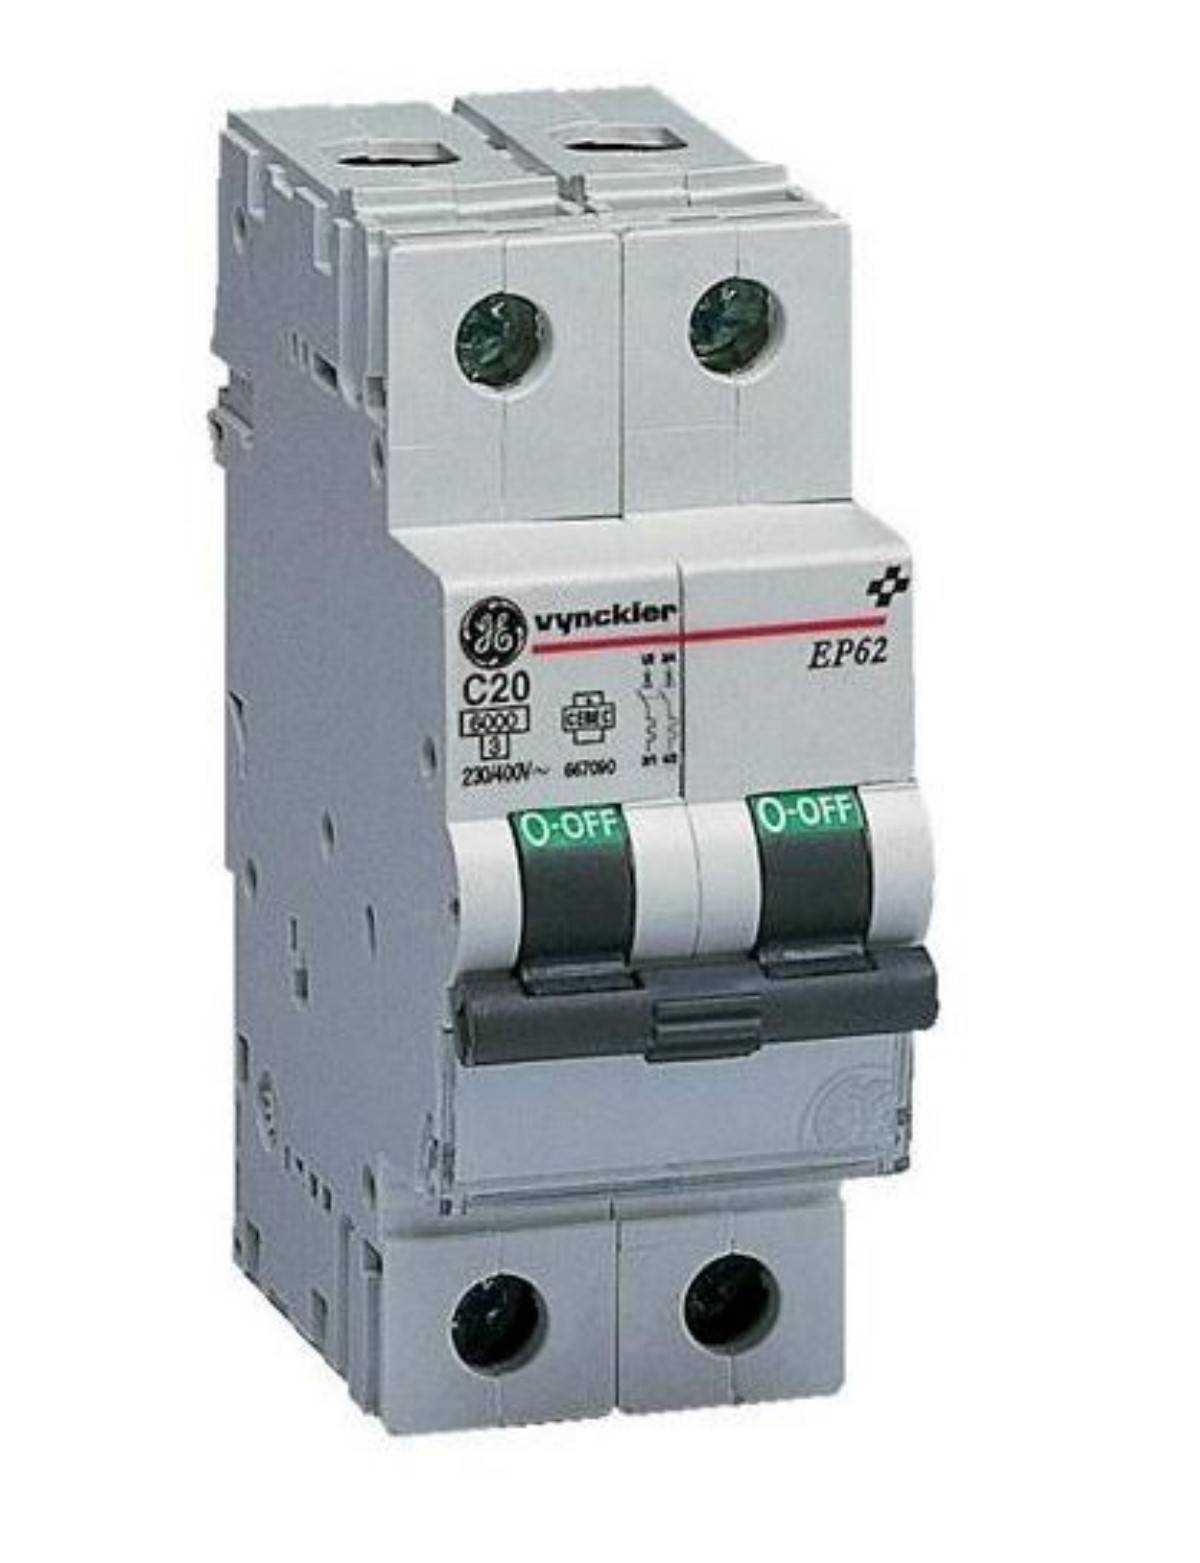 GE POWER 566691 EP61ND06 Switch - Image 1